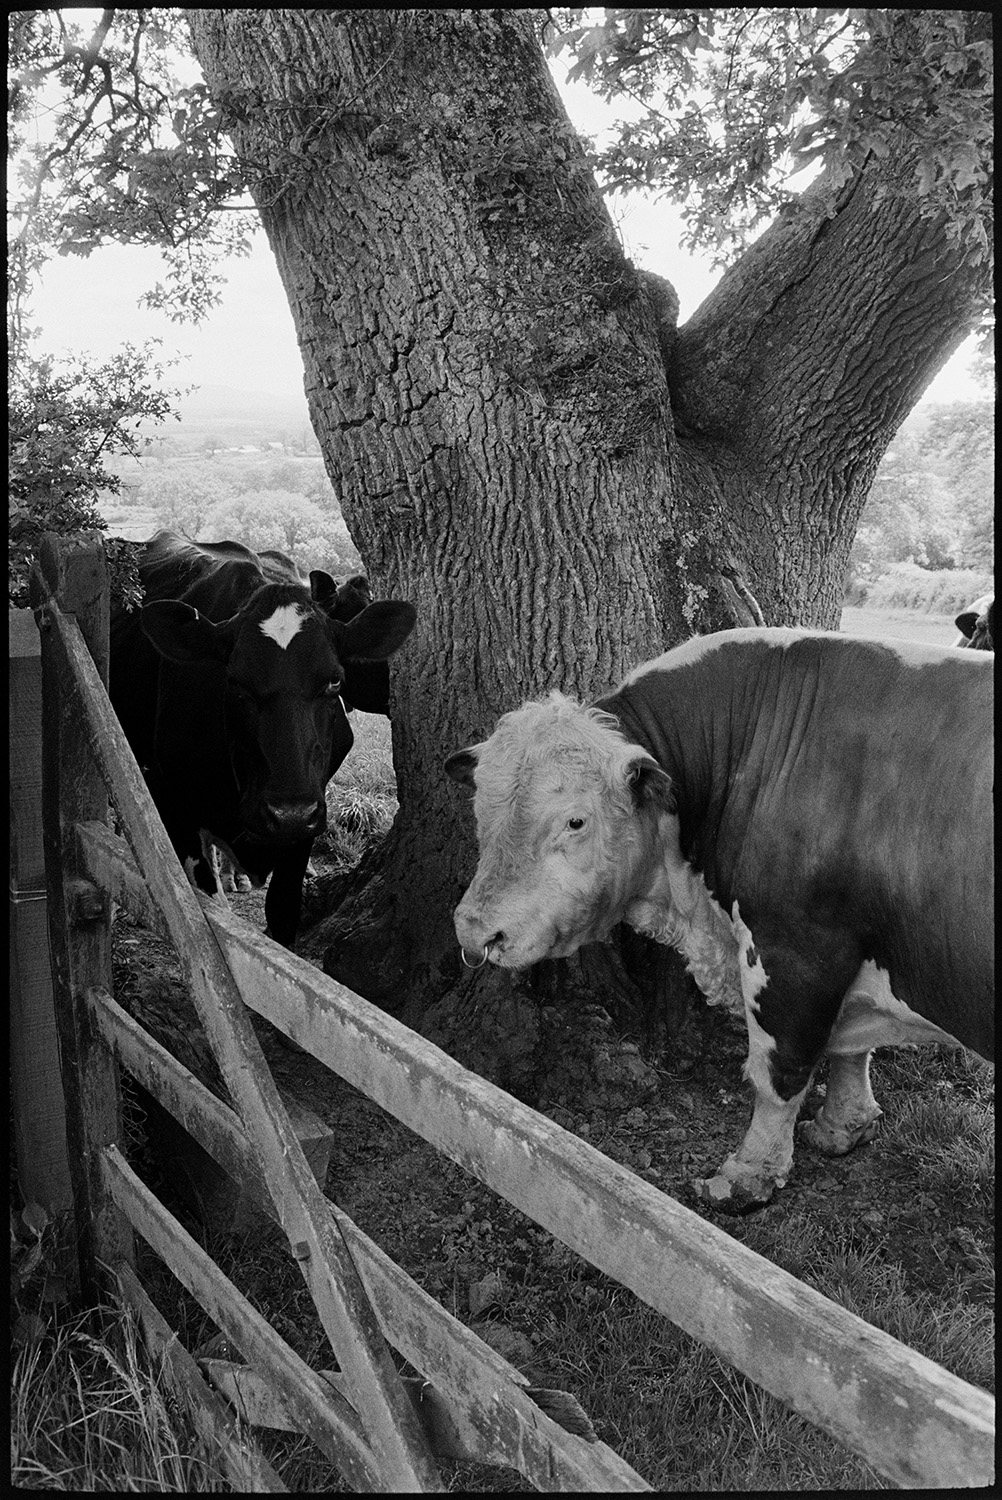 Hereford bull against tree.
[A Hereford bull standing next to a tree with cows gathered around by a field gate at Highampton.]